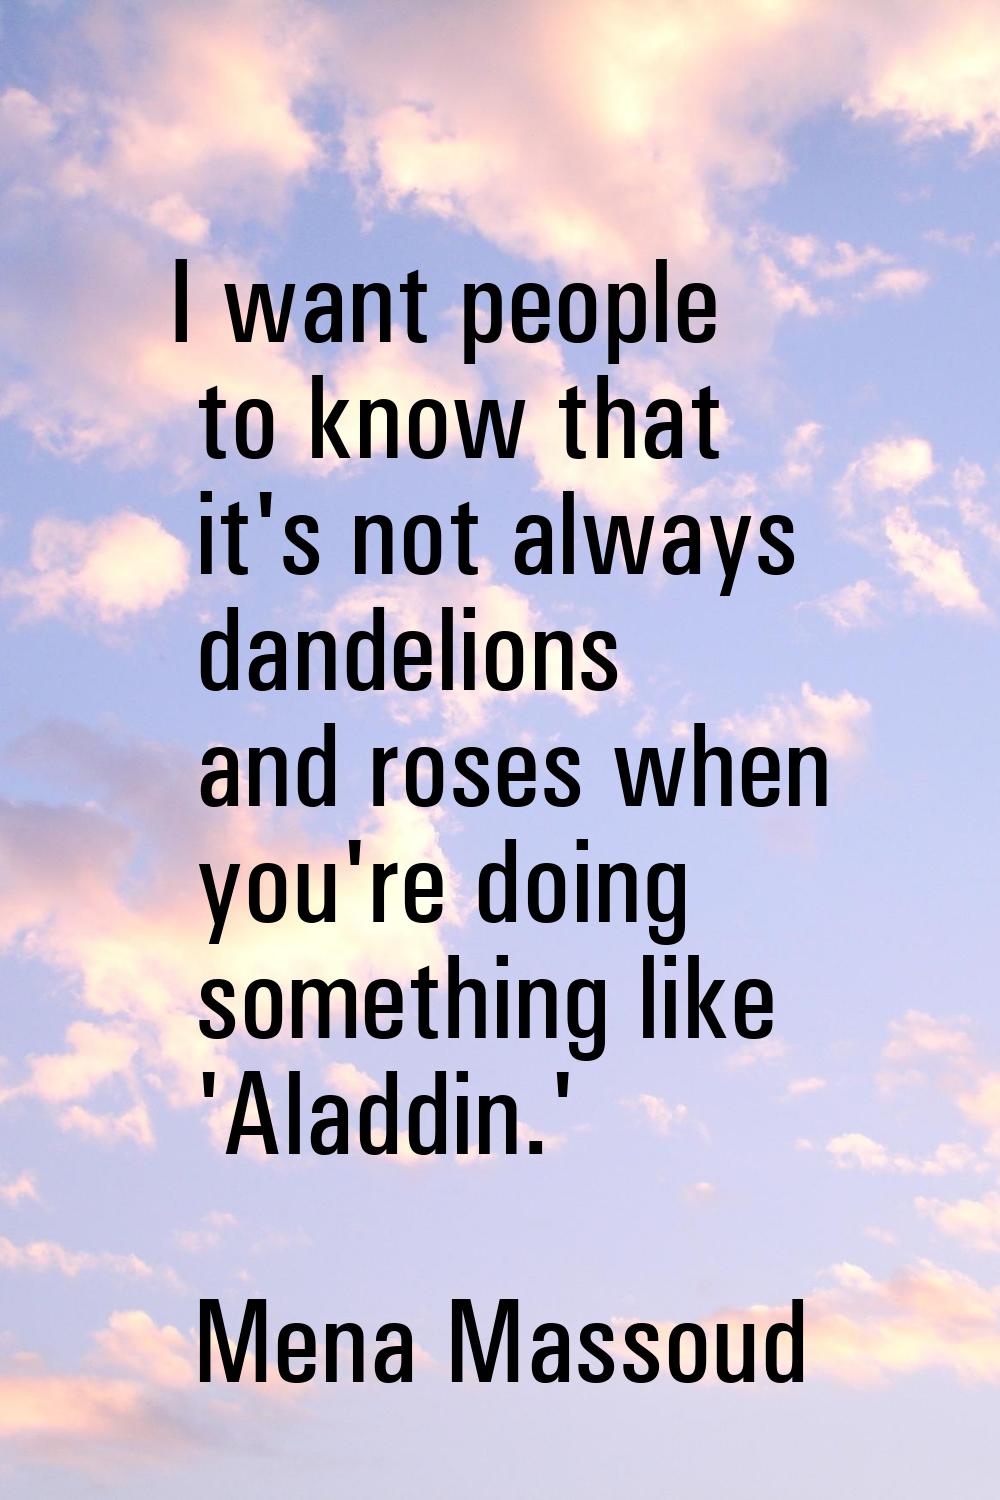 I want people to know that it's not always dandelions and roses when you're doing something like 'A